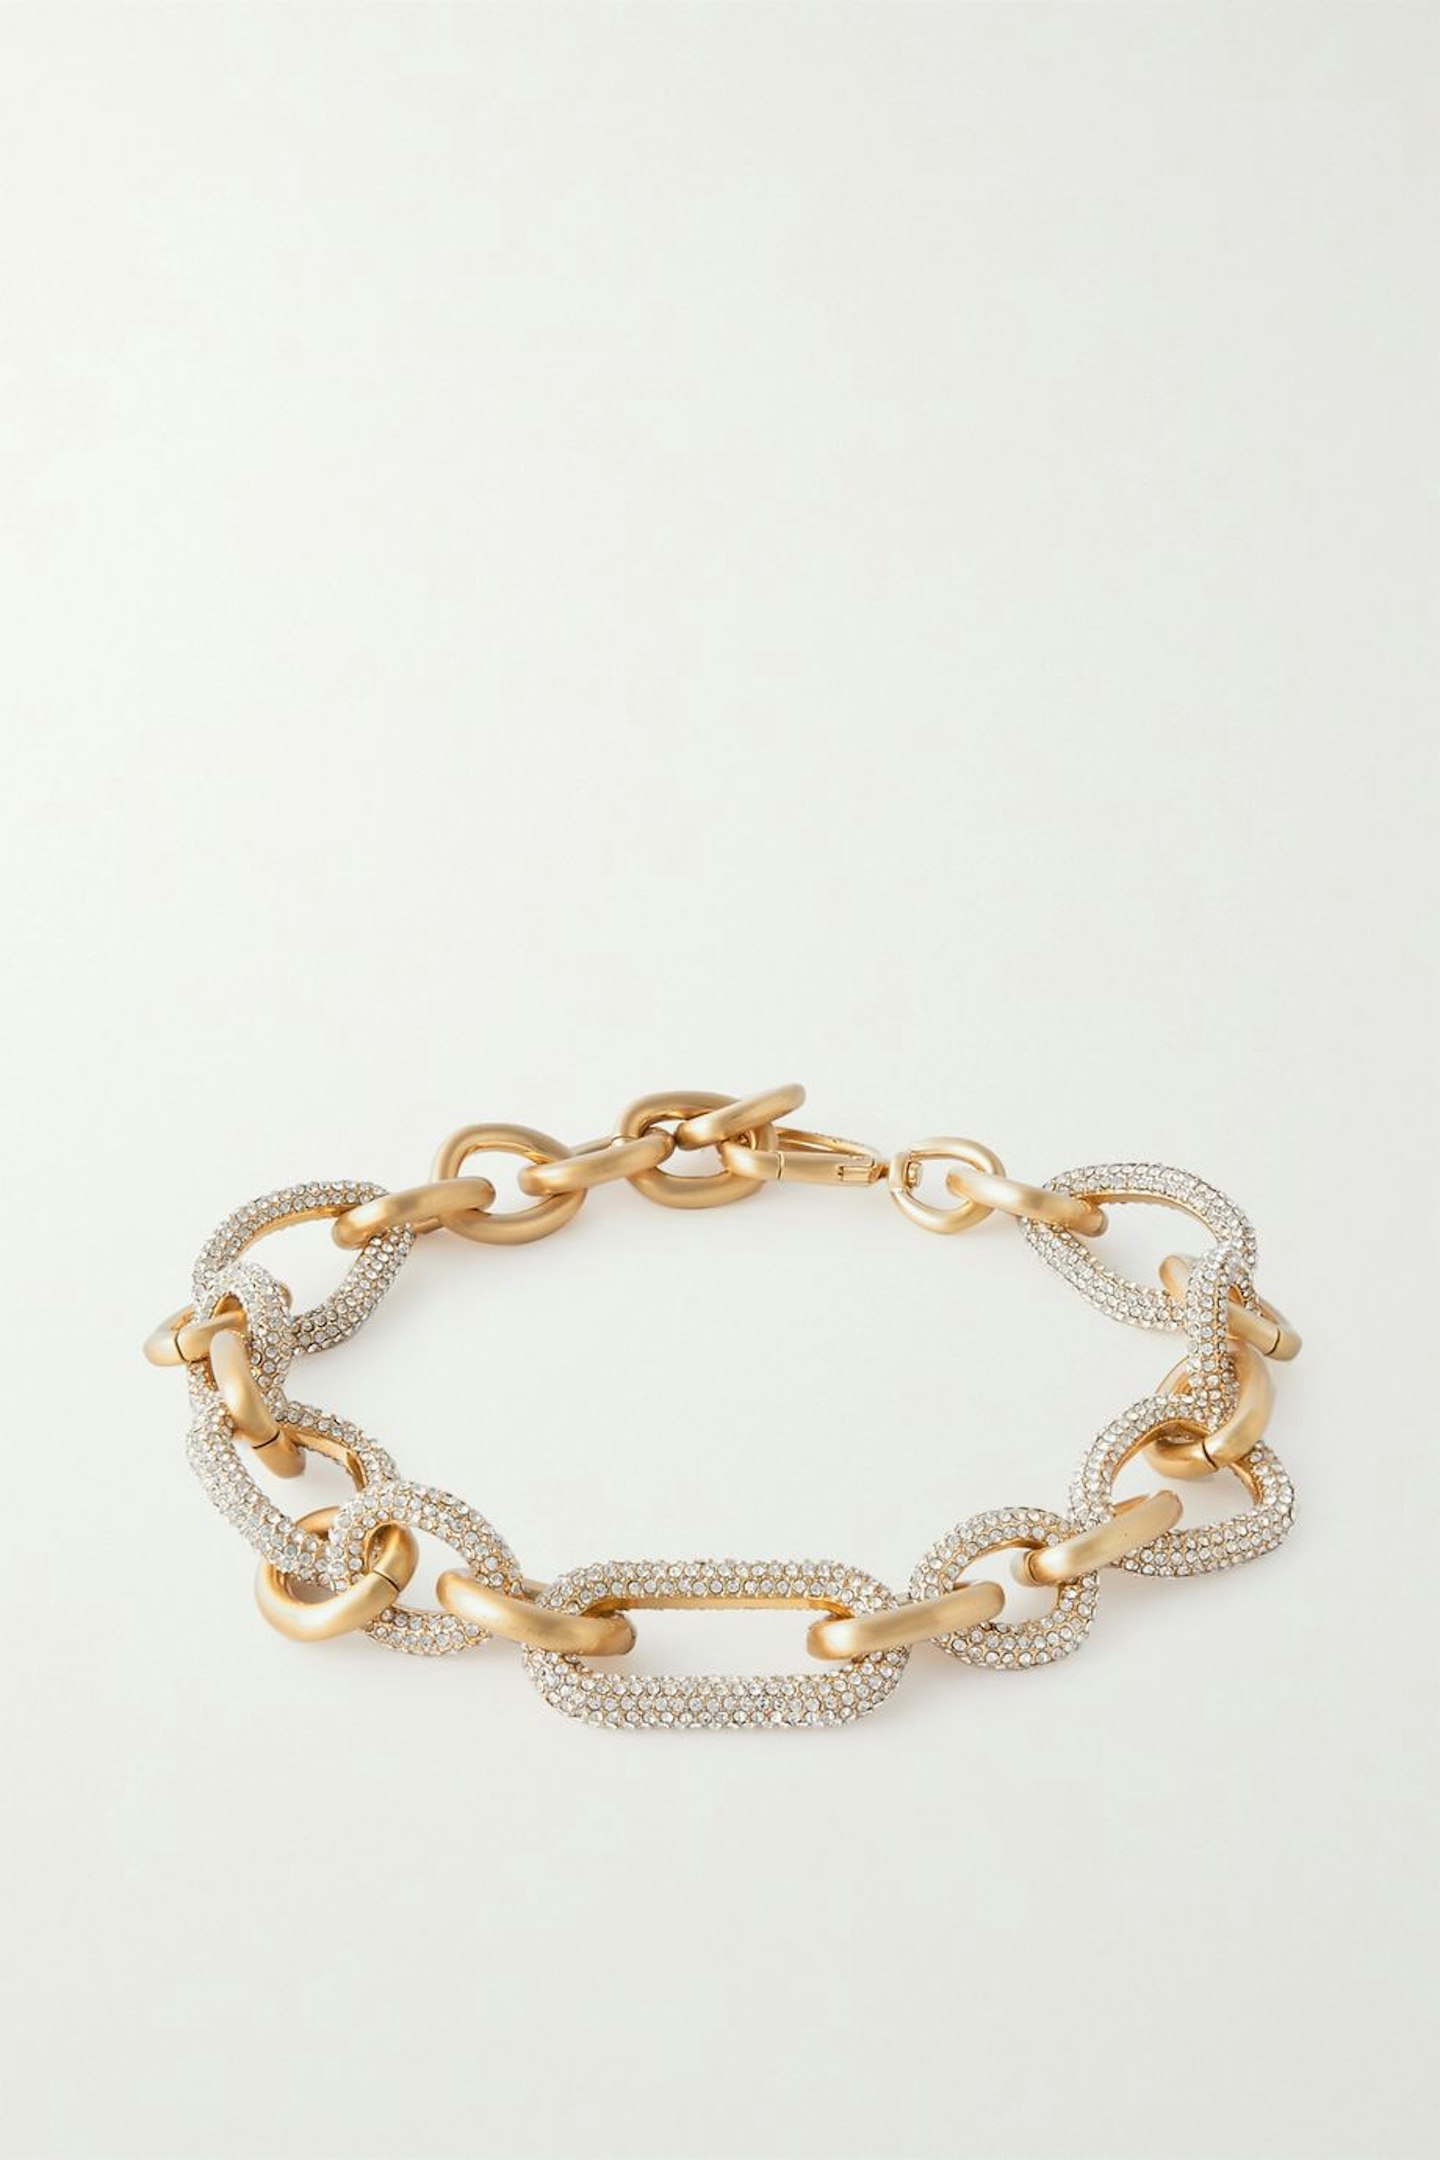 Cult Gaia, Reyes Gold-Tone Crystal Necklace